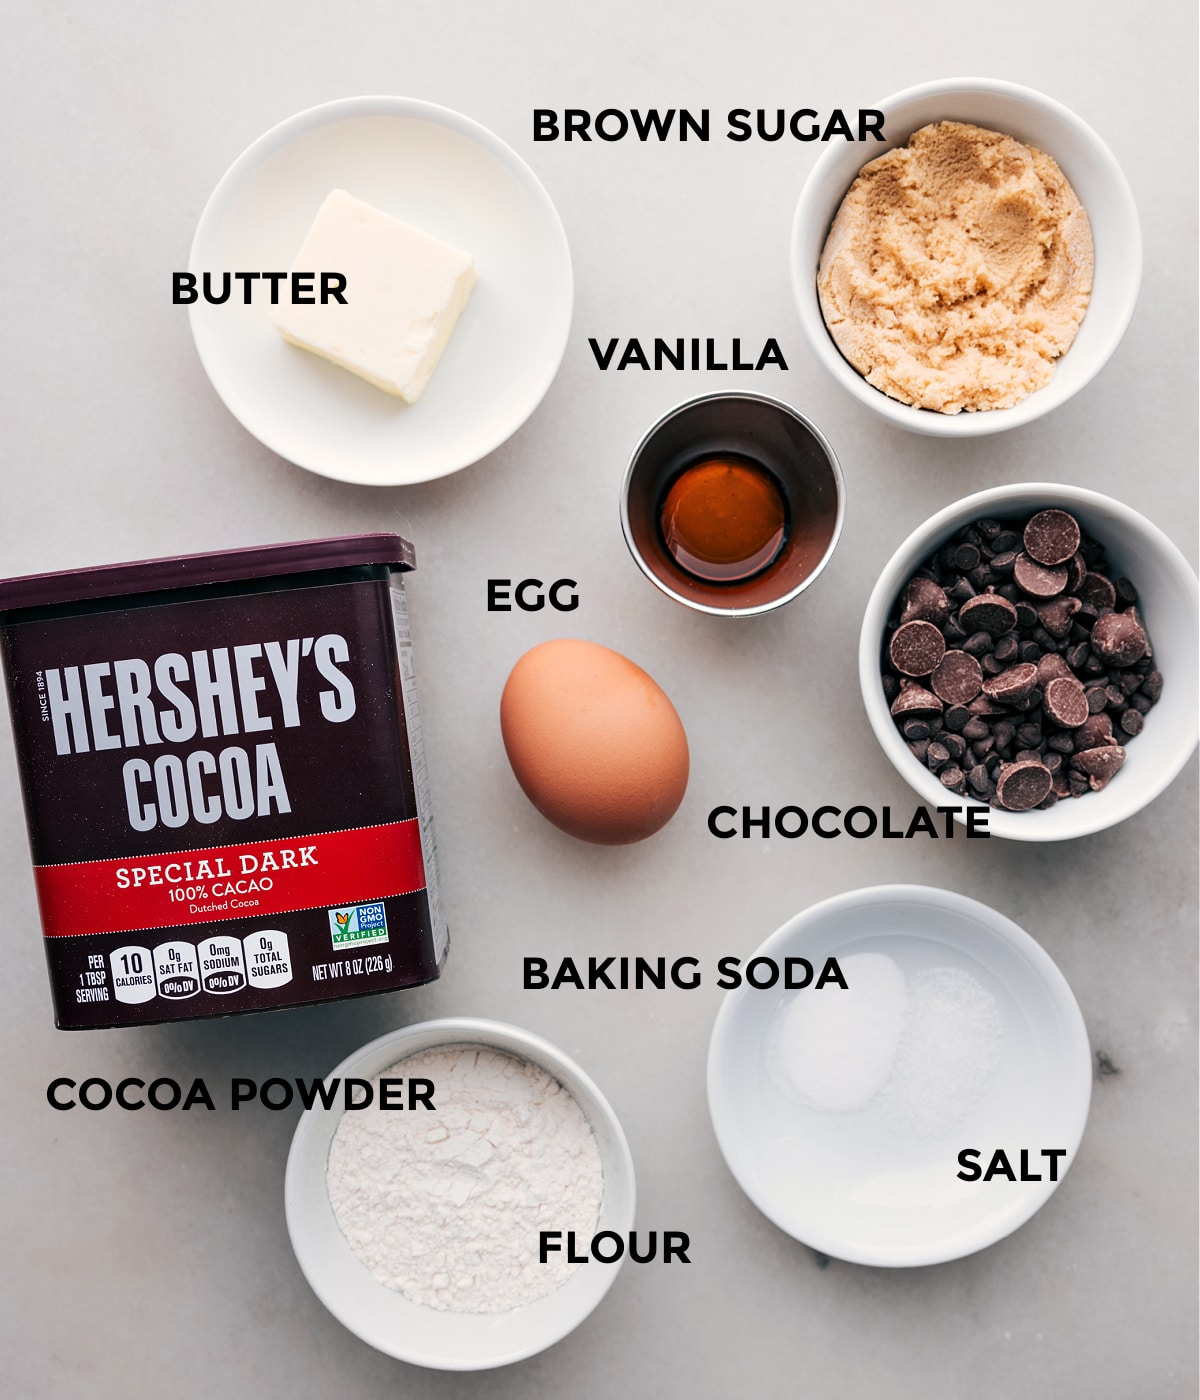 Ingredients used in this dessert prepped out for easy assembly.